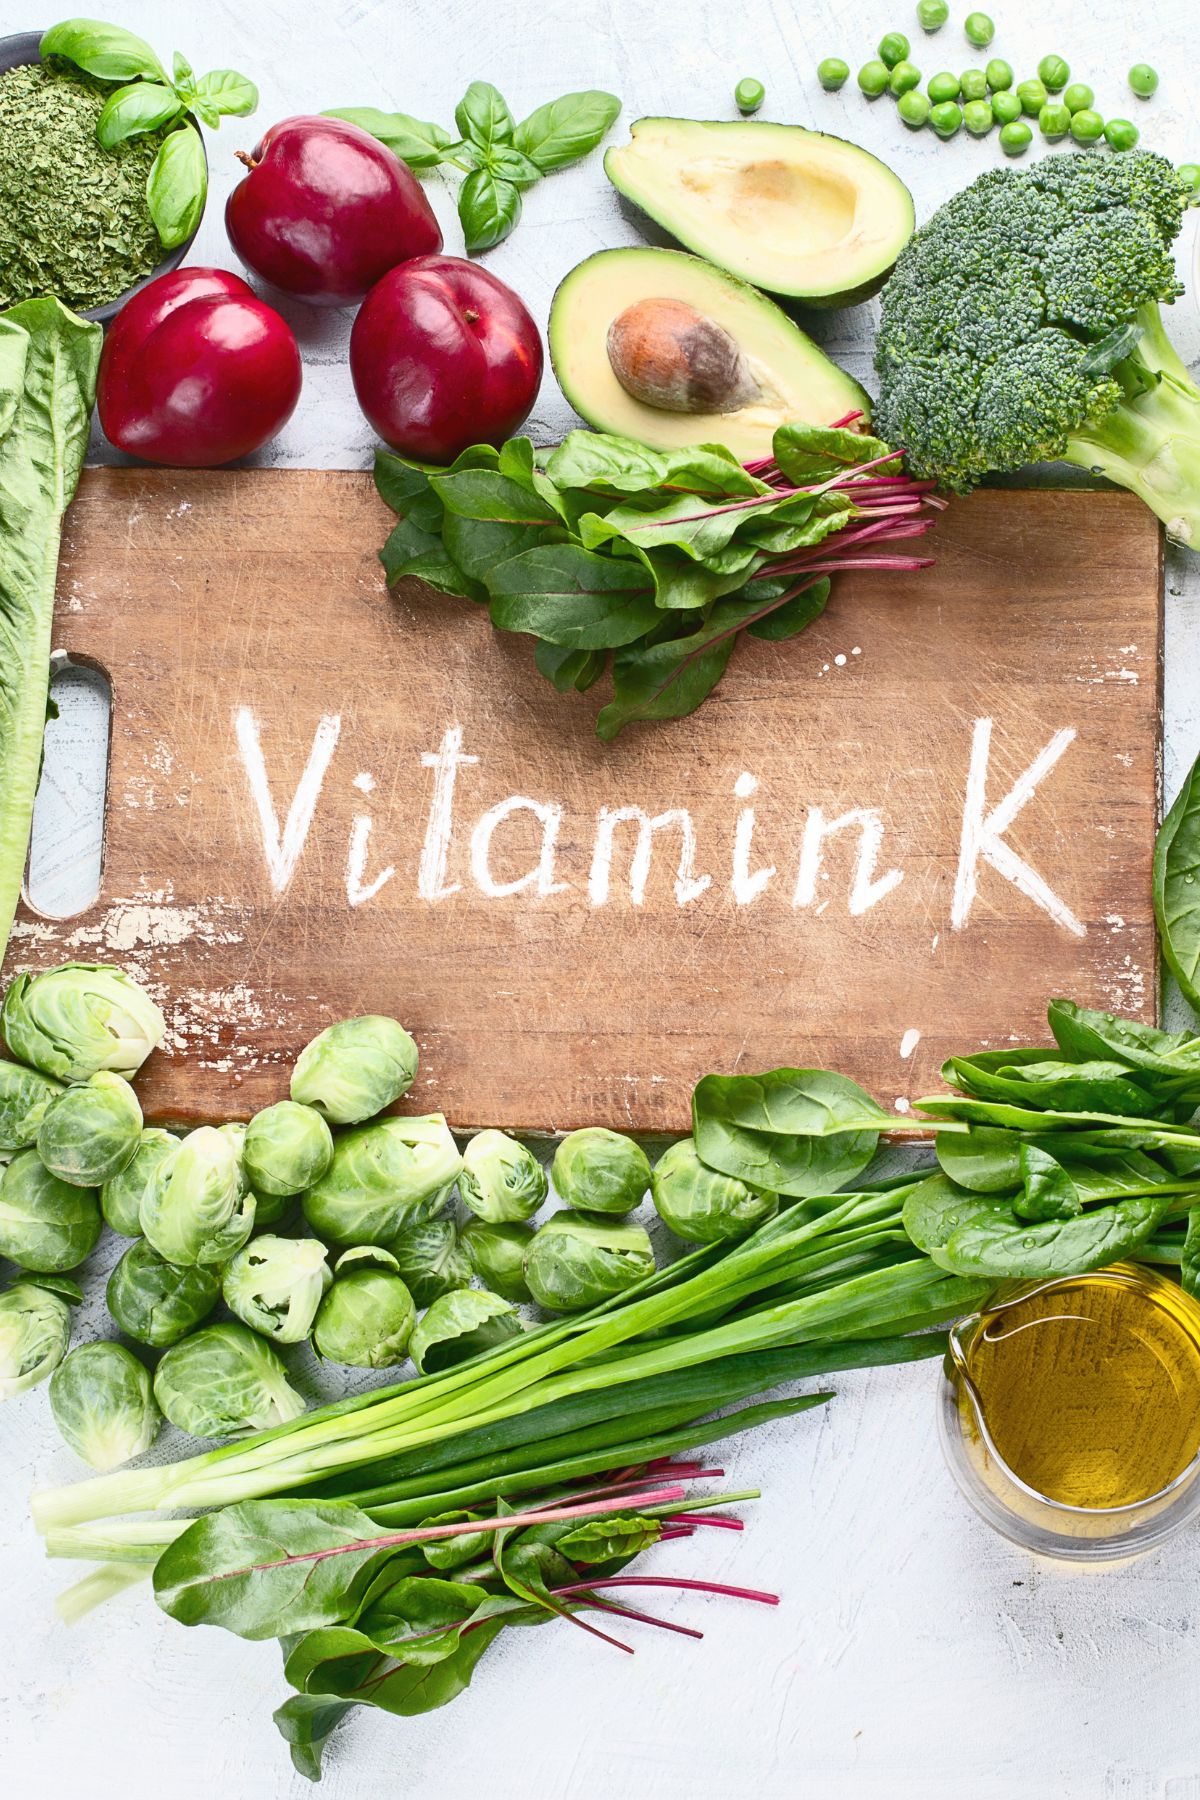 foods high in vitamin k surrounding a sign that says "vitamin k".